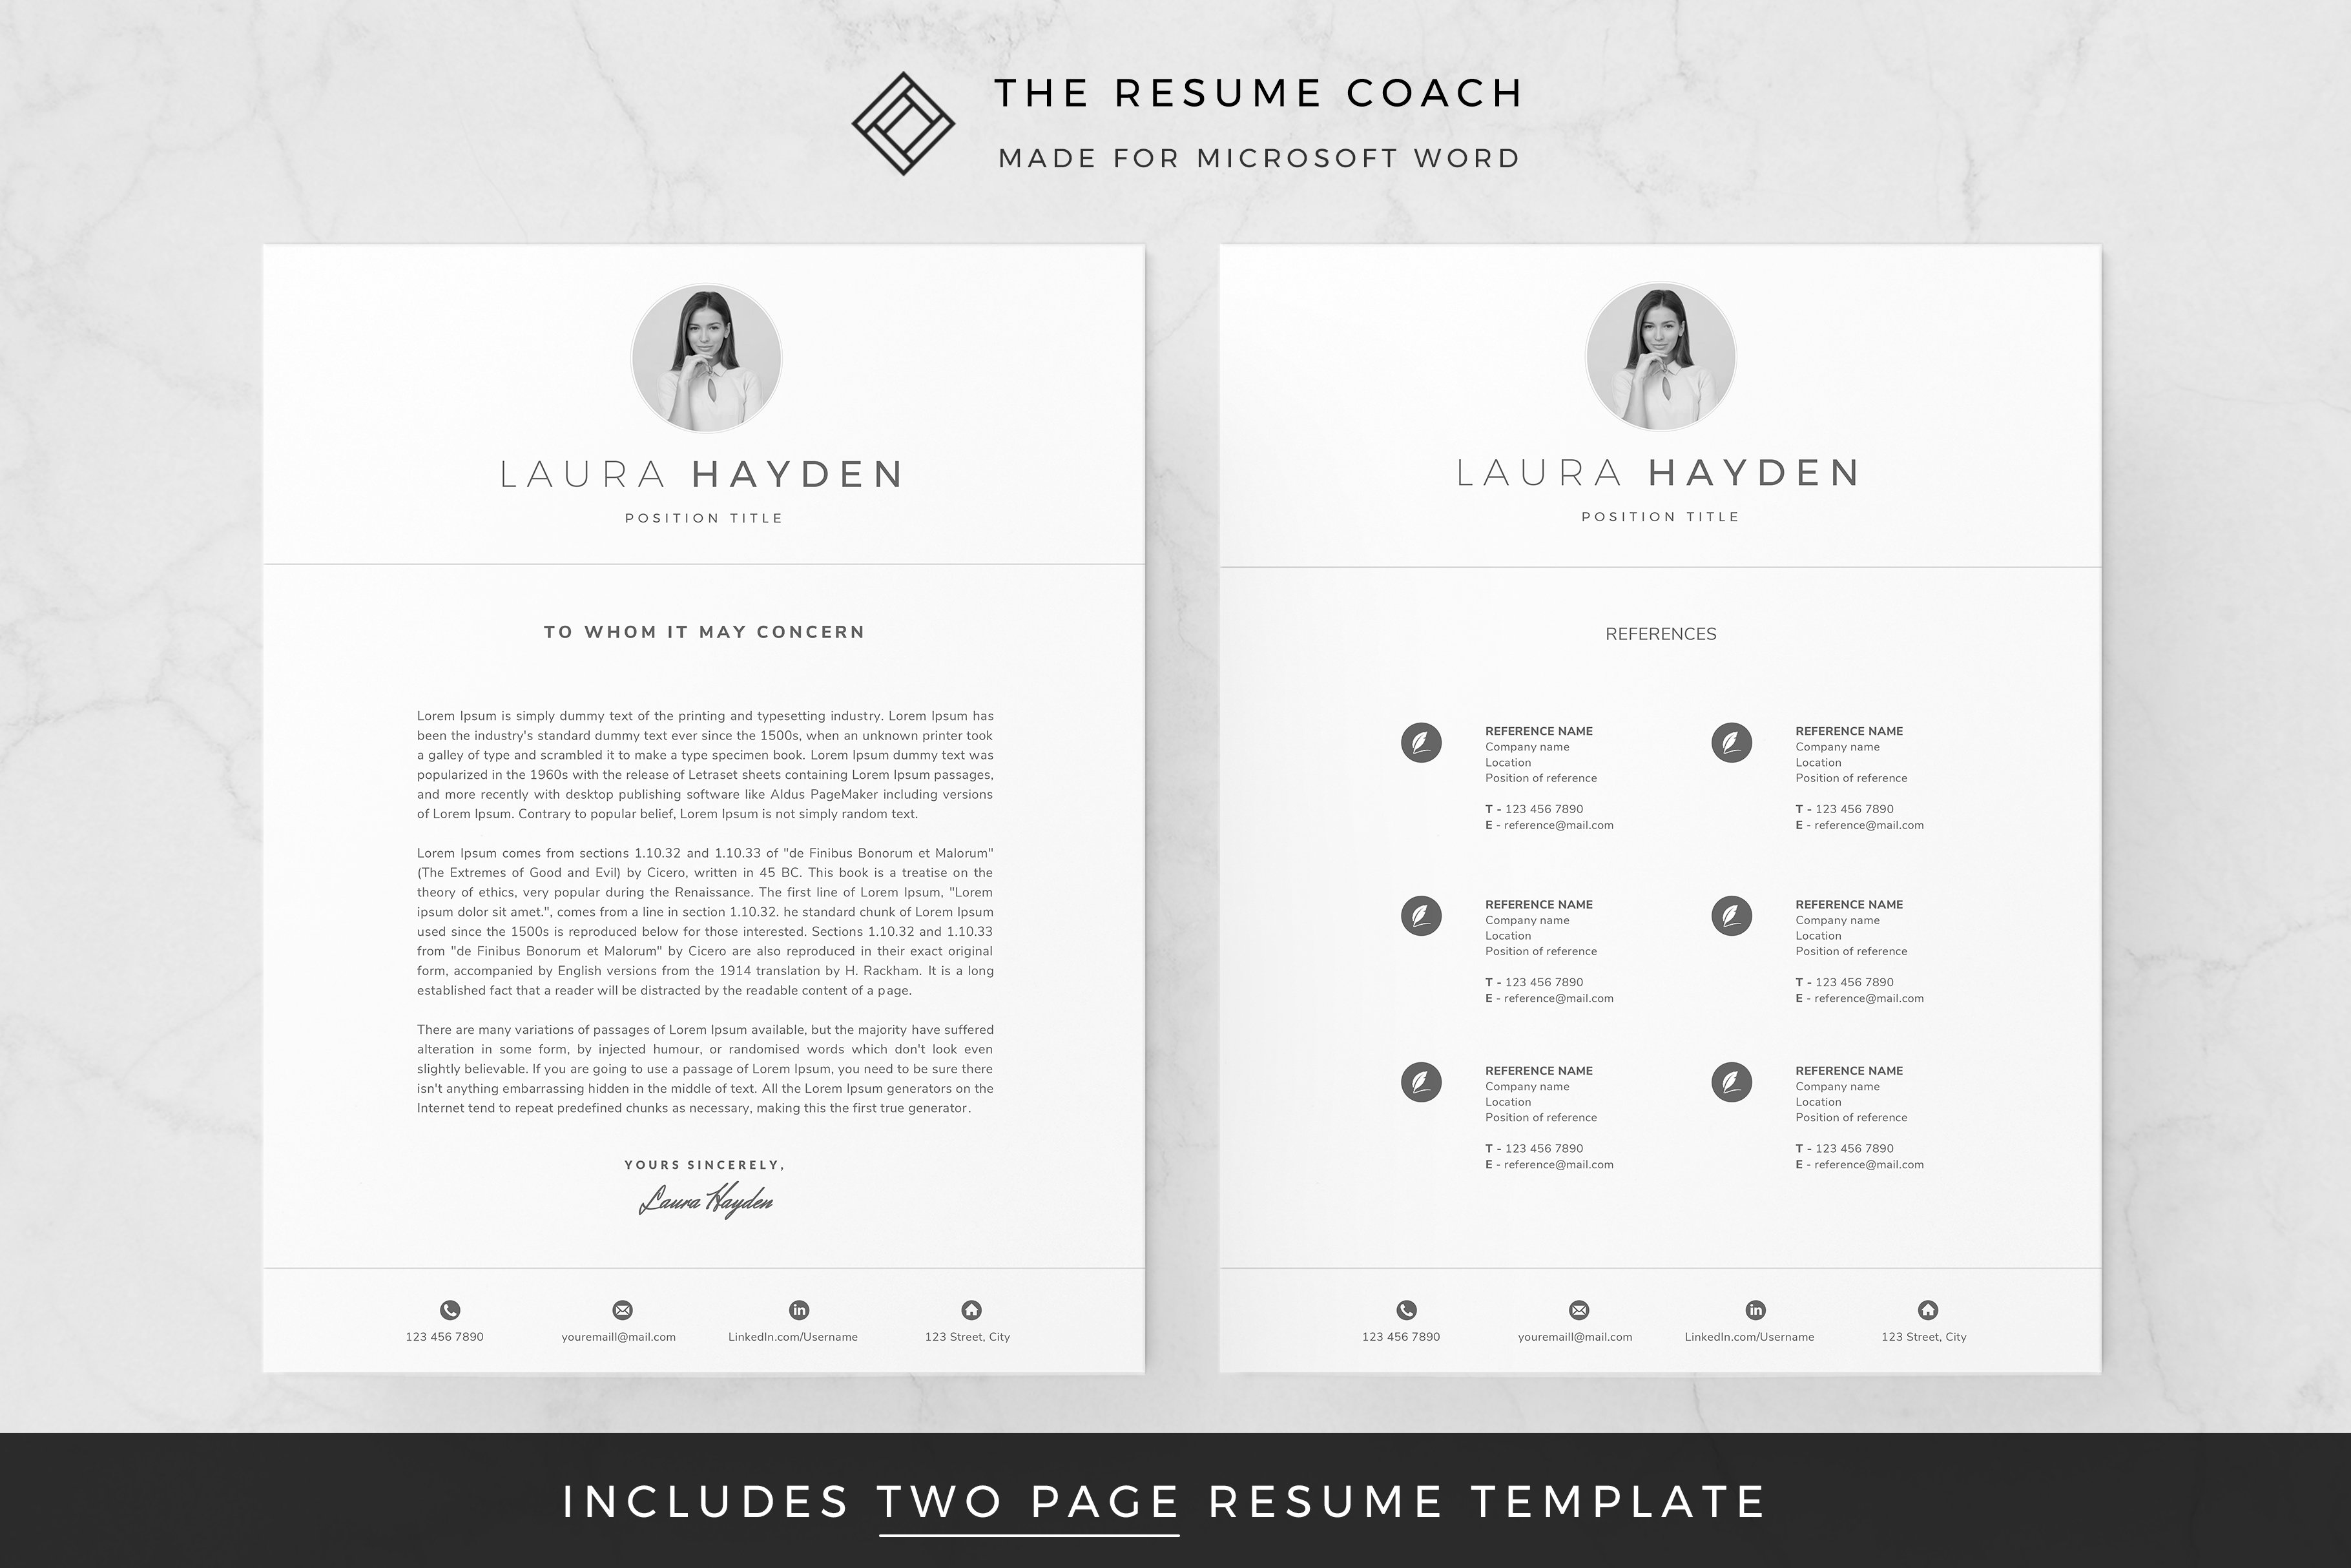 Two pages of a resume template on a marble background.